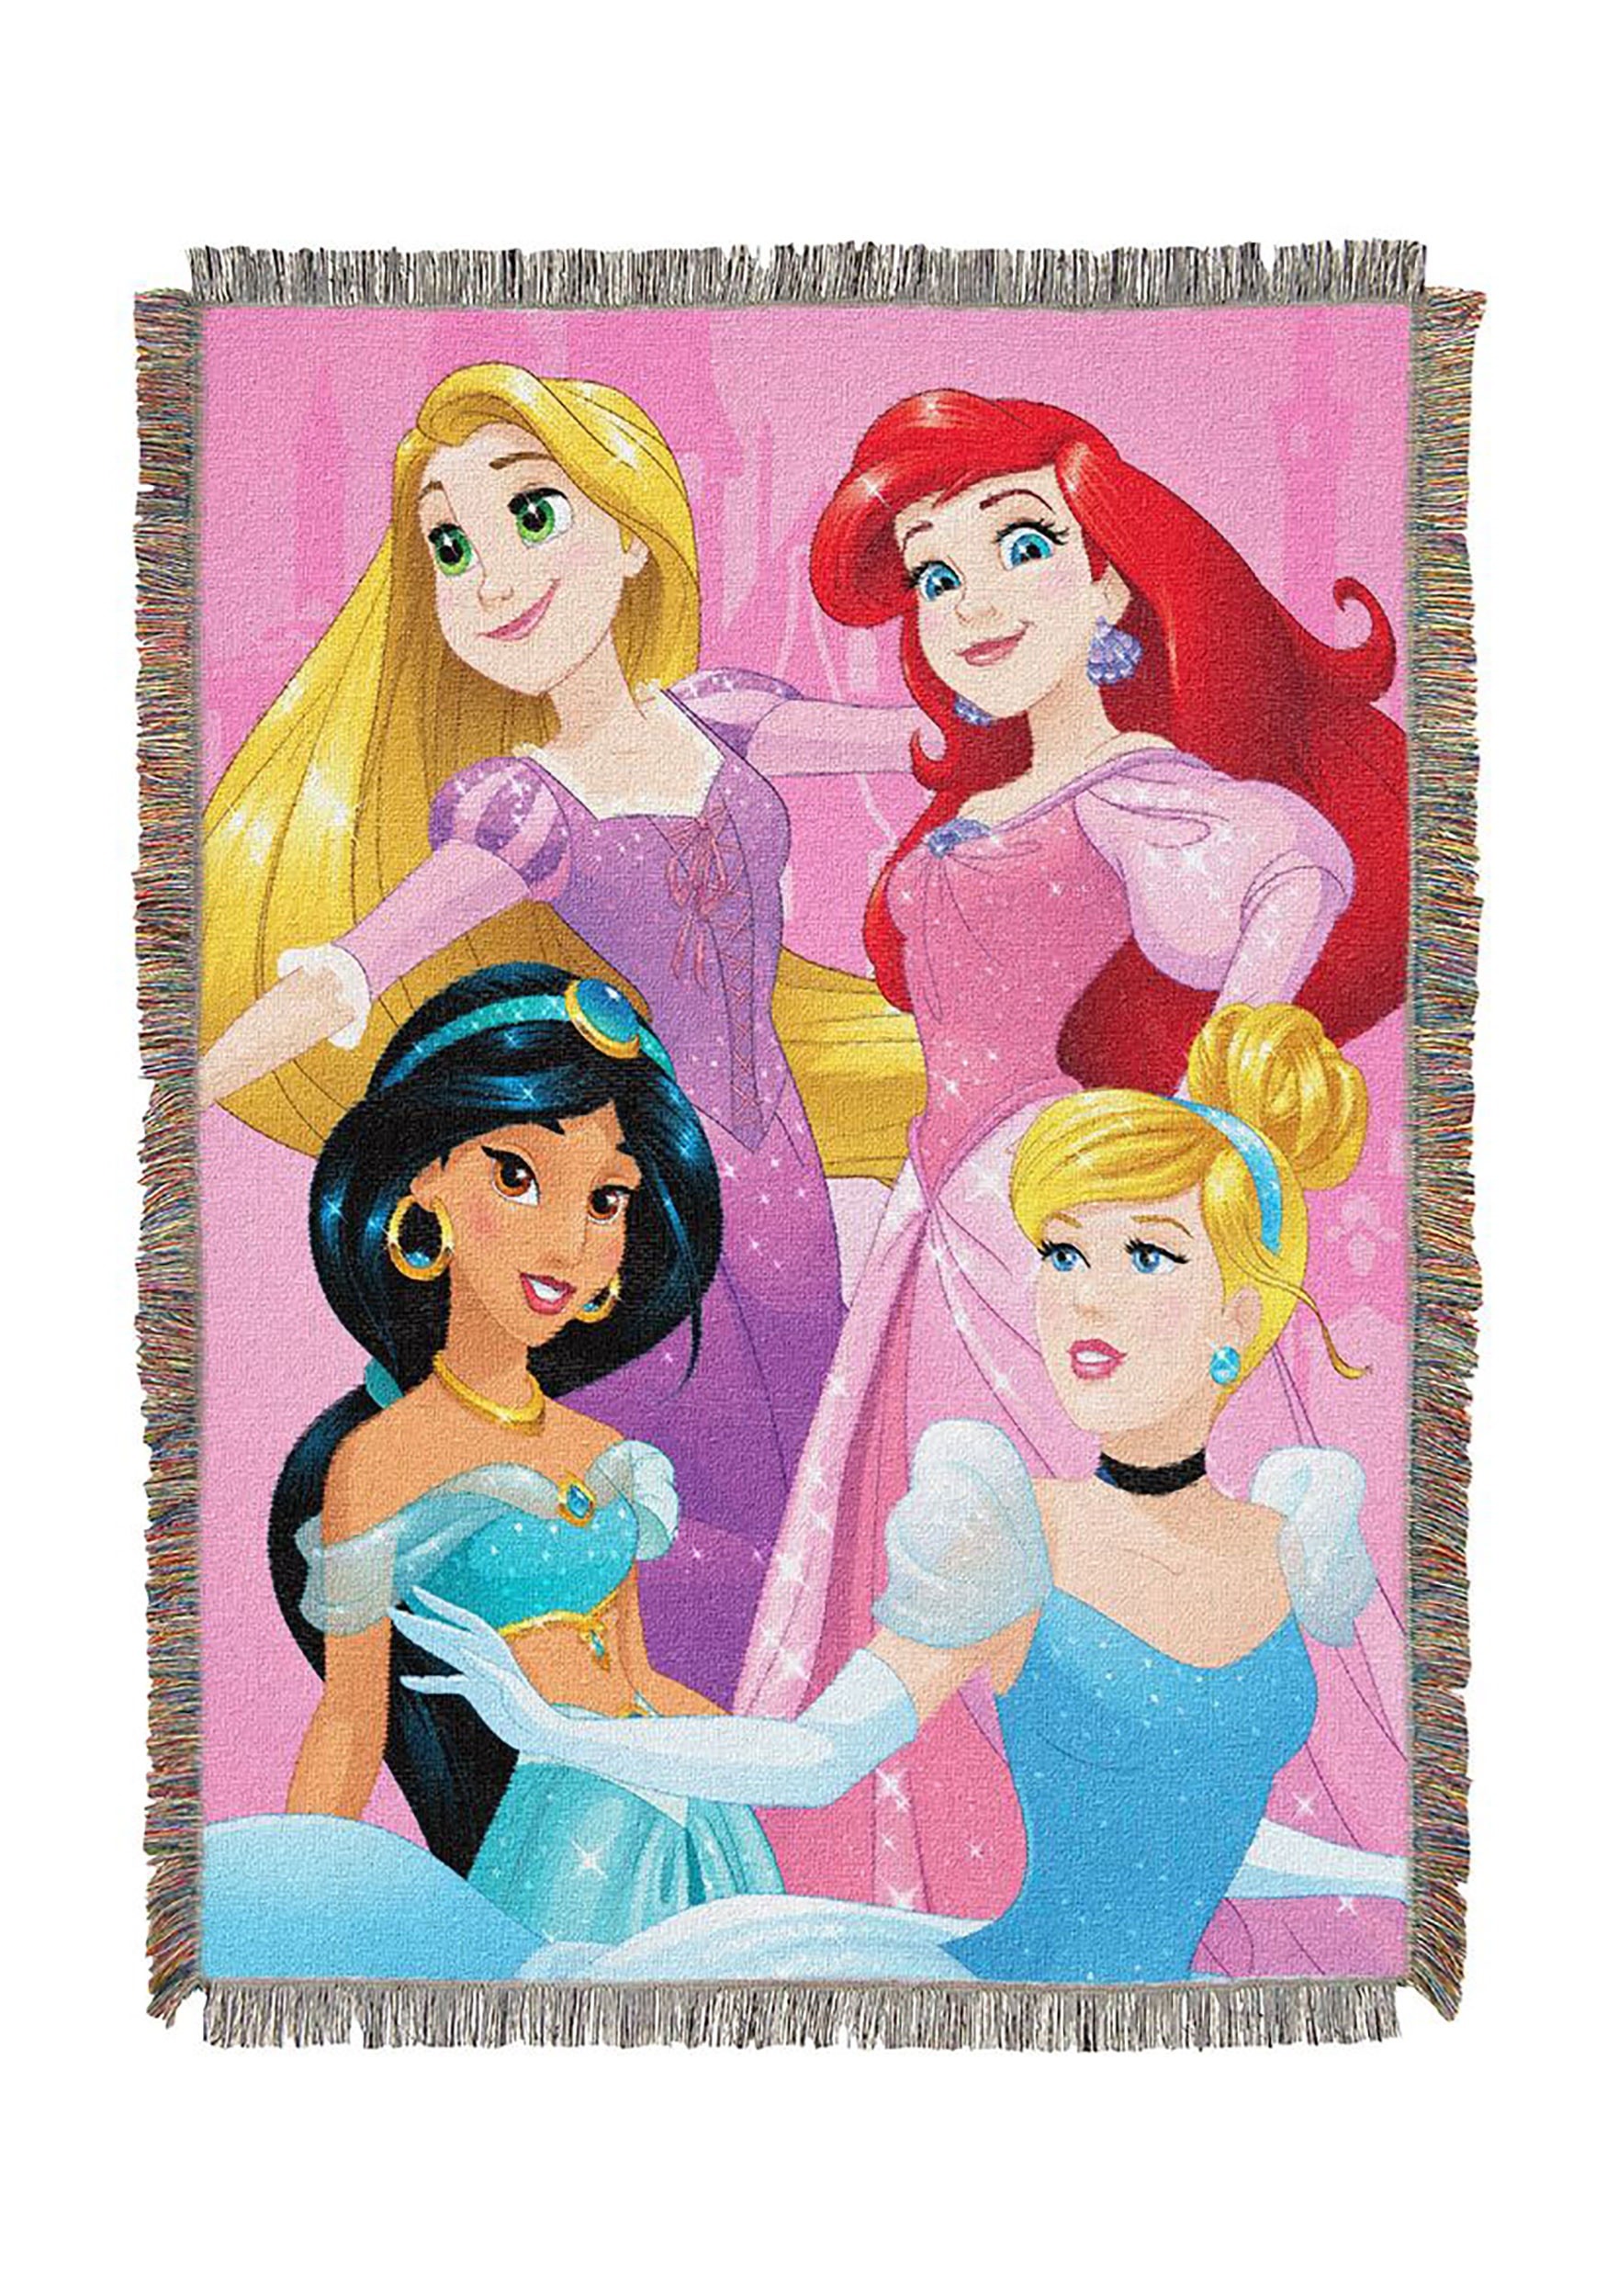 Born to Rule Disney Princesses Woven Tapestry Throw